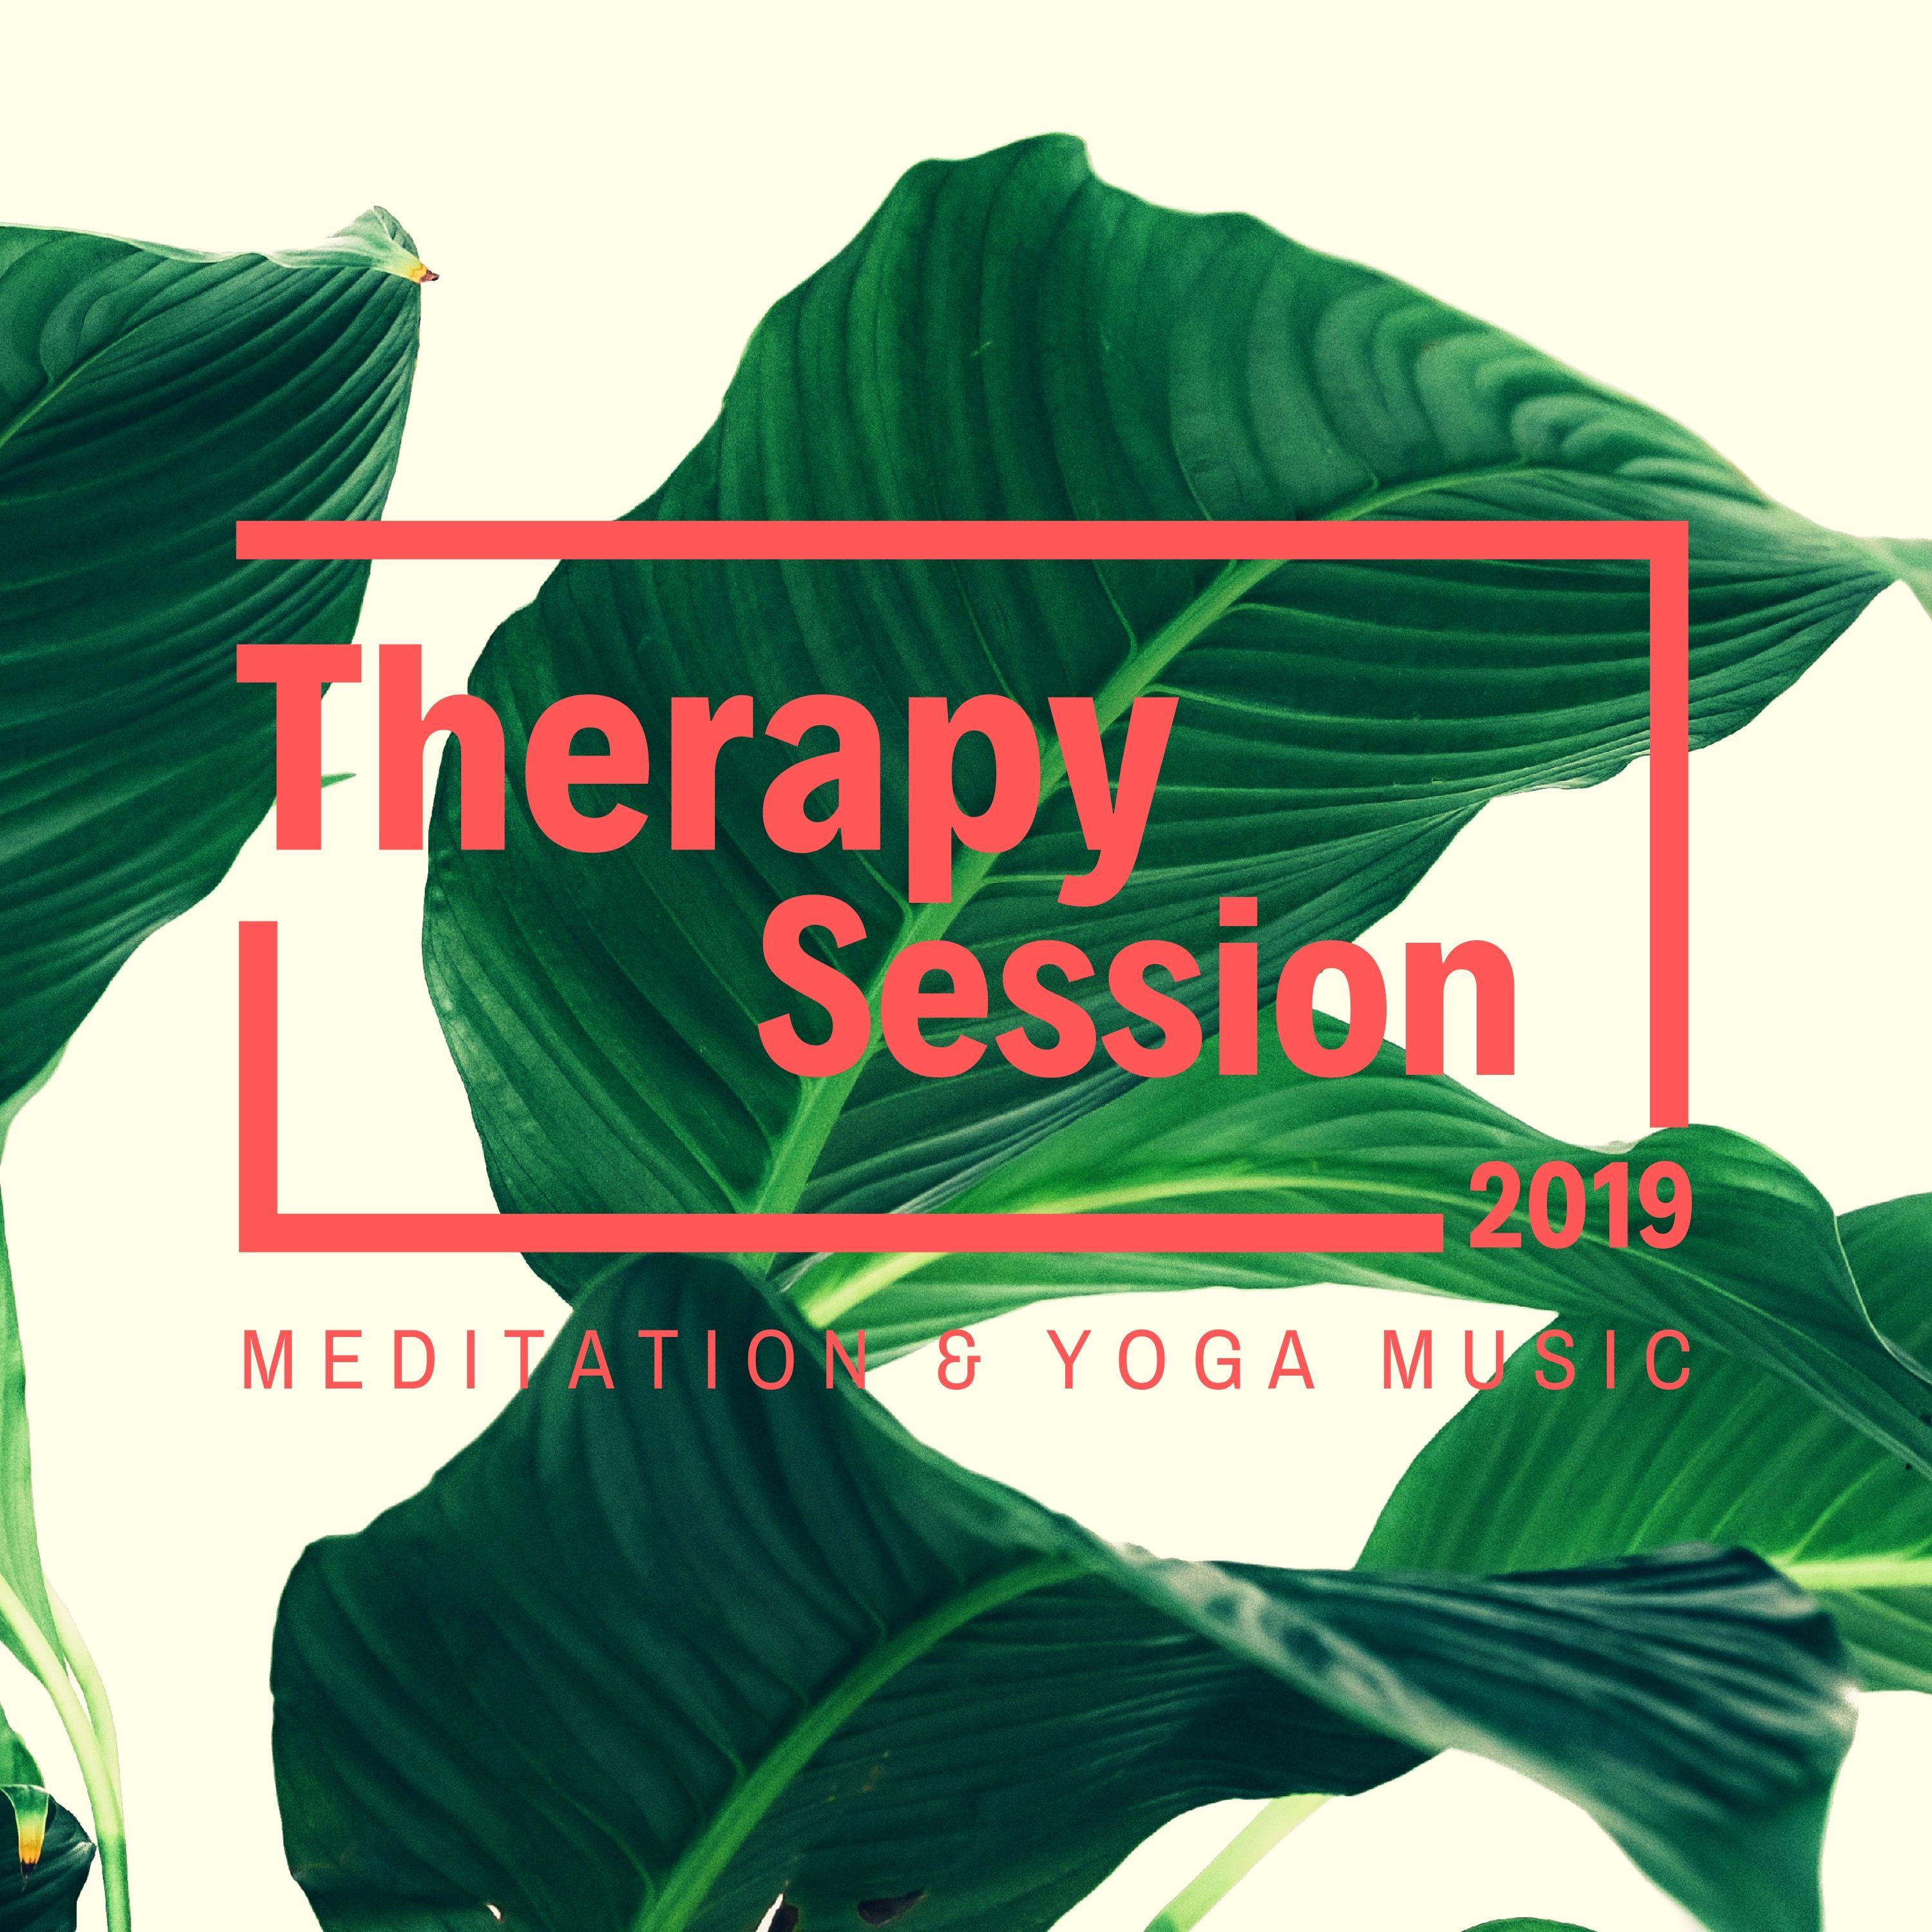 Therapy Session 2019: Meditation & Yoga Music